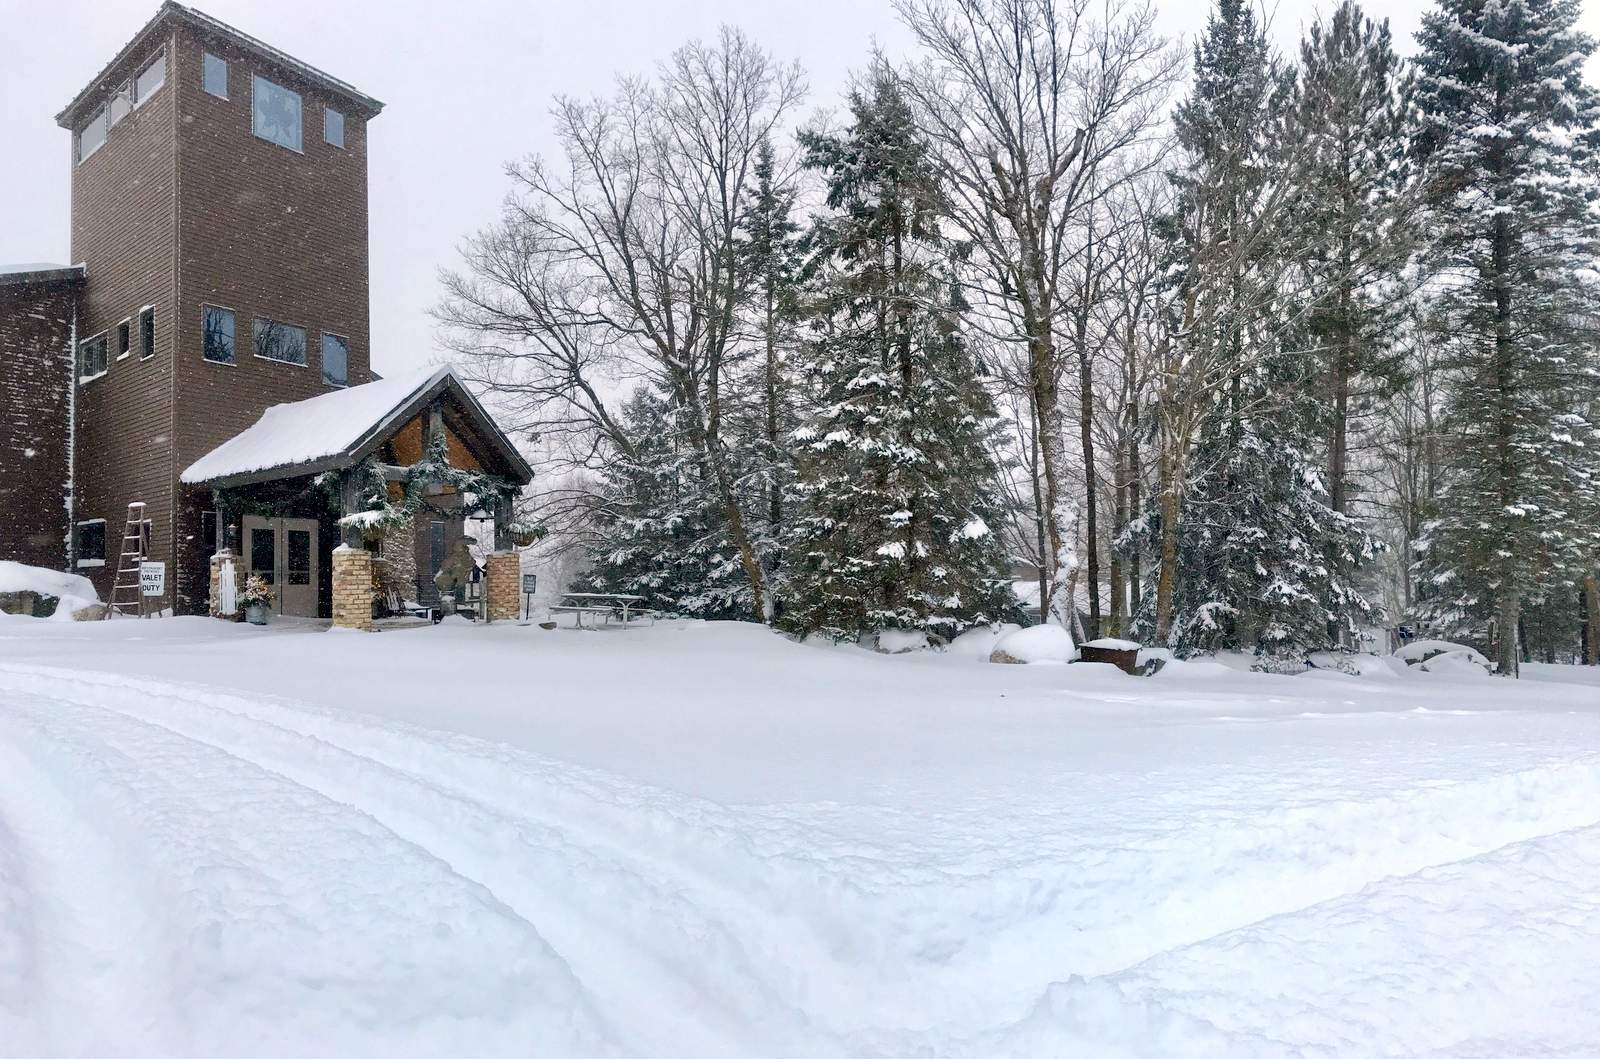 Snowy scene in front of the lodge, December 7th, 2016.